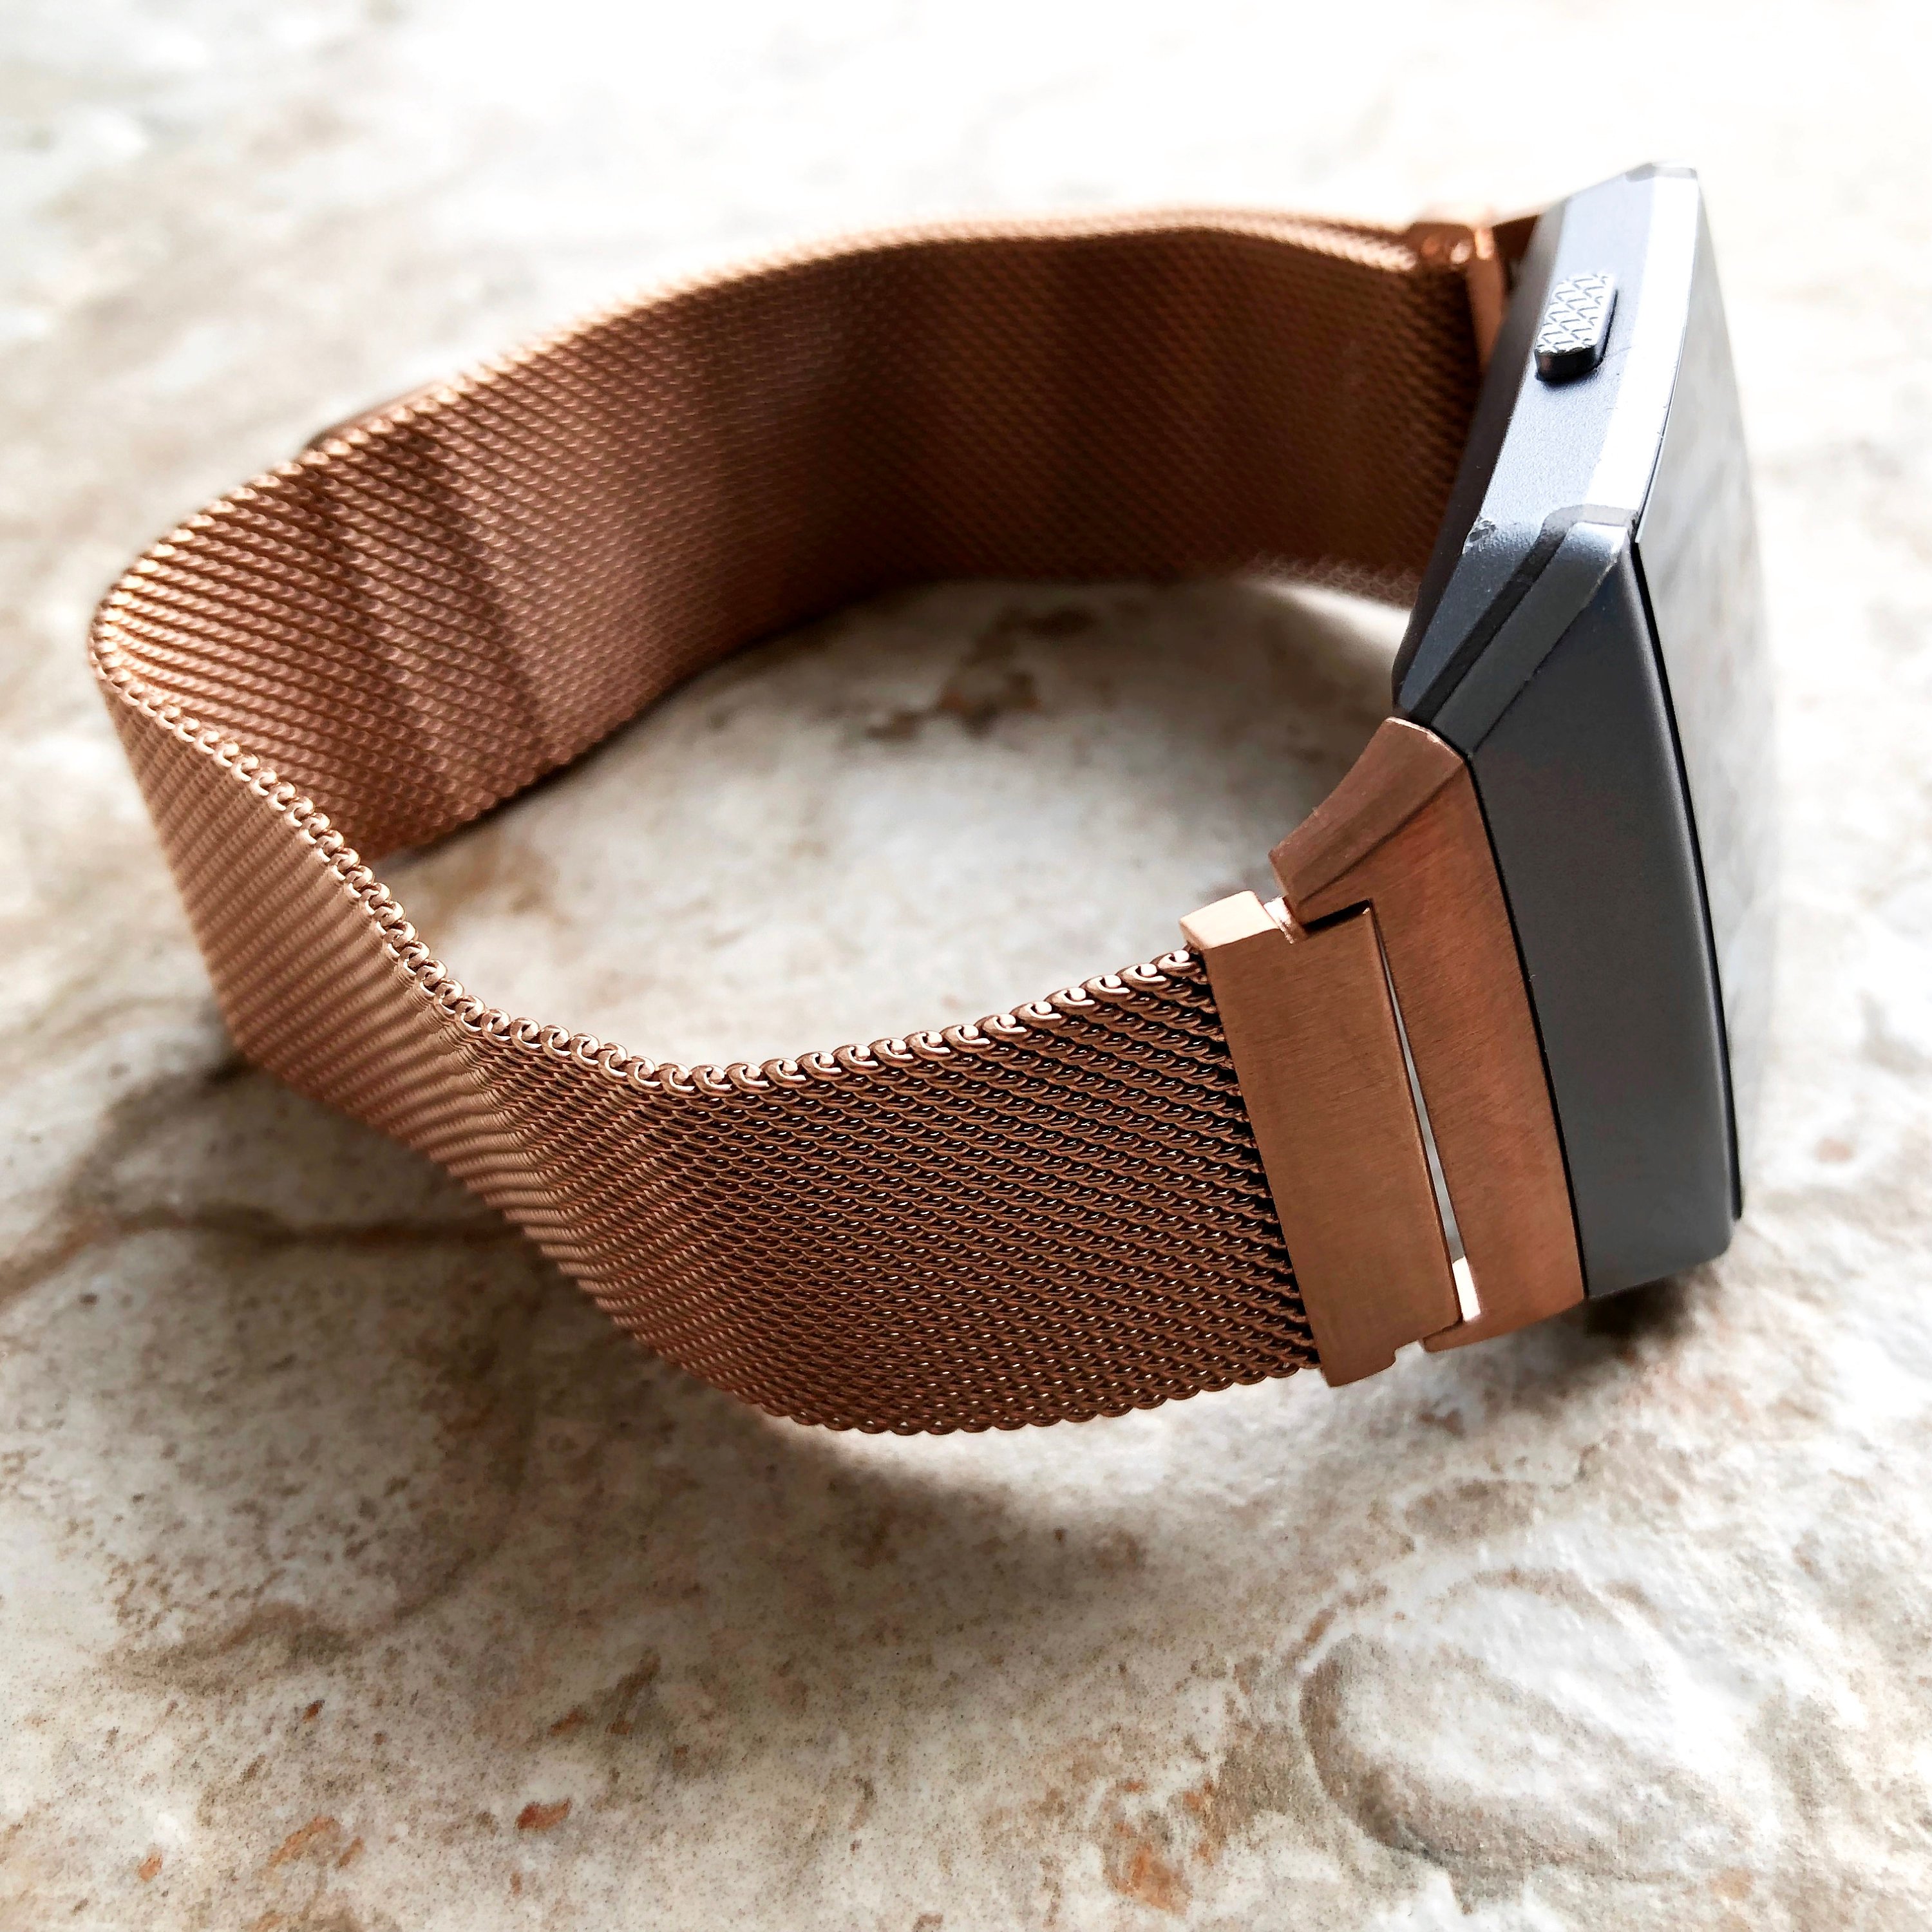 mesh fitbit band